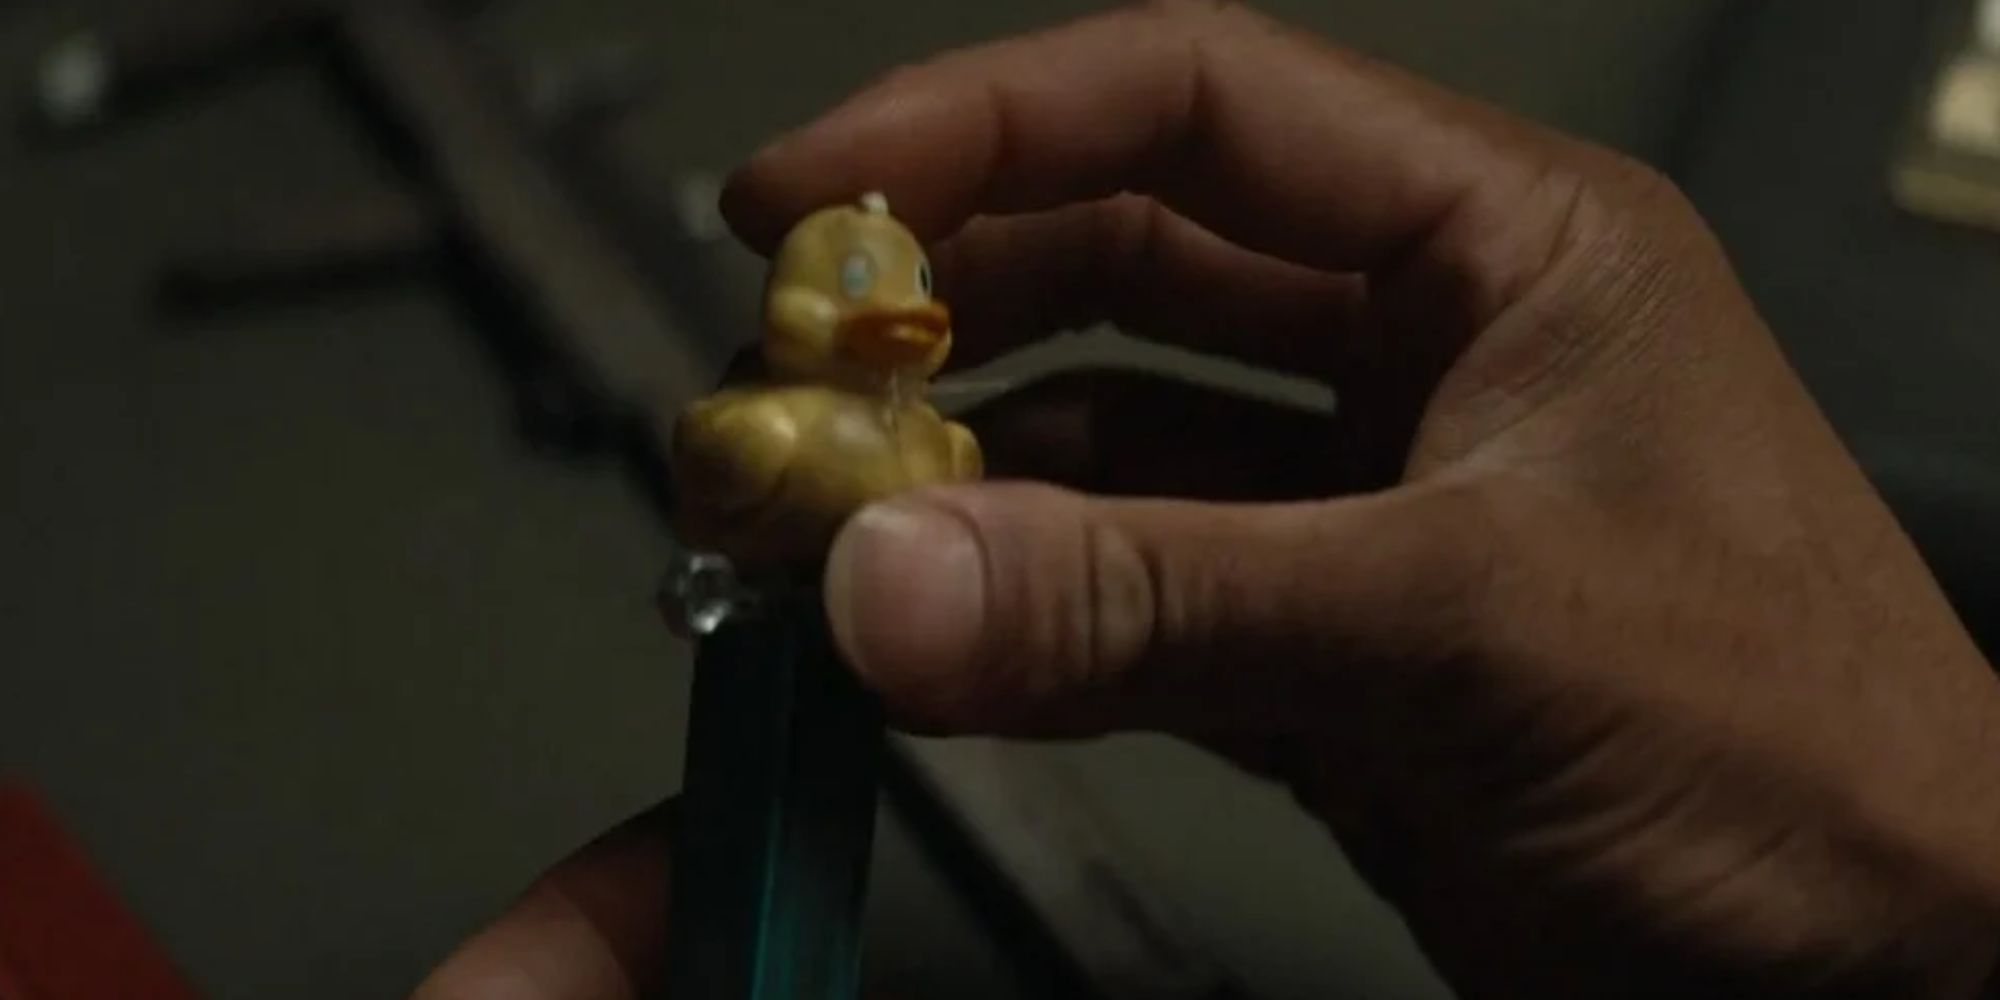 Hands holding a relic known as a Duck Pez dispenser in Silo